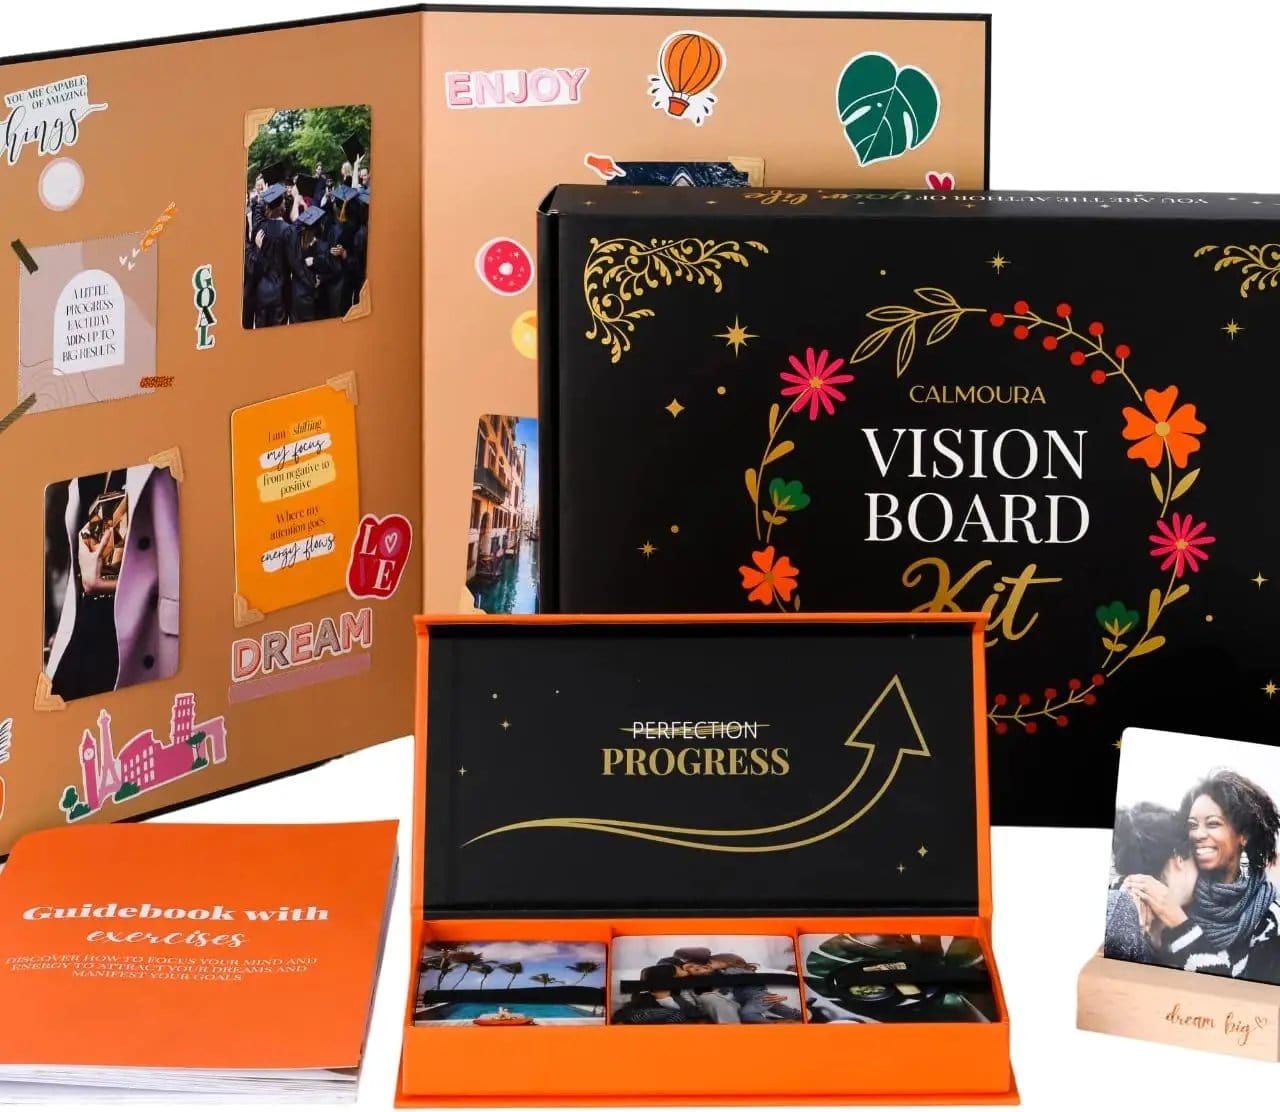 Calmoura Vision Board Kit for Beginners (100 Cards, 1 Card Box, 1 Guidebook & Exercises, 4 Vision Board Stickers, Washi Sheets, & More)